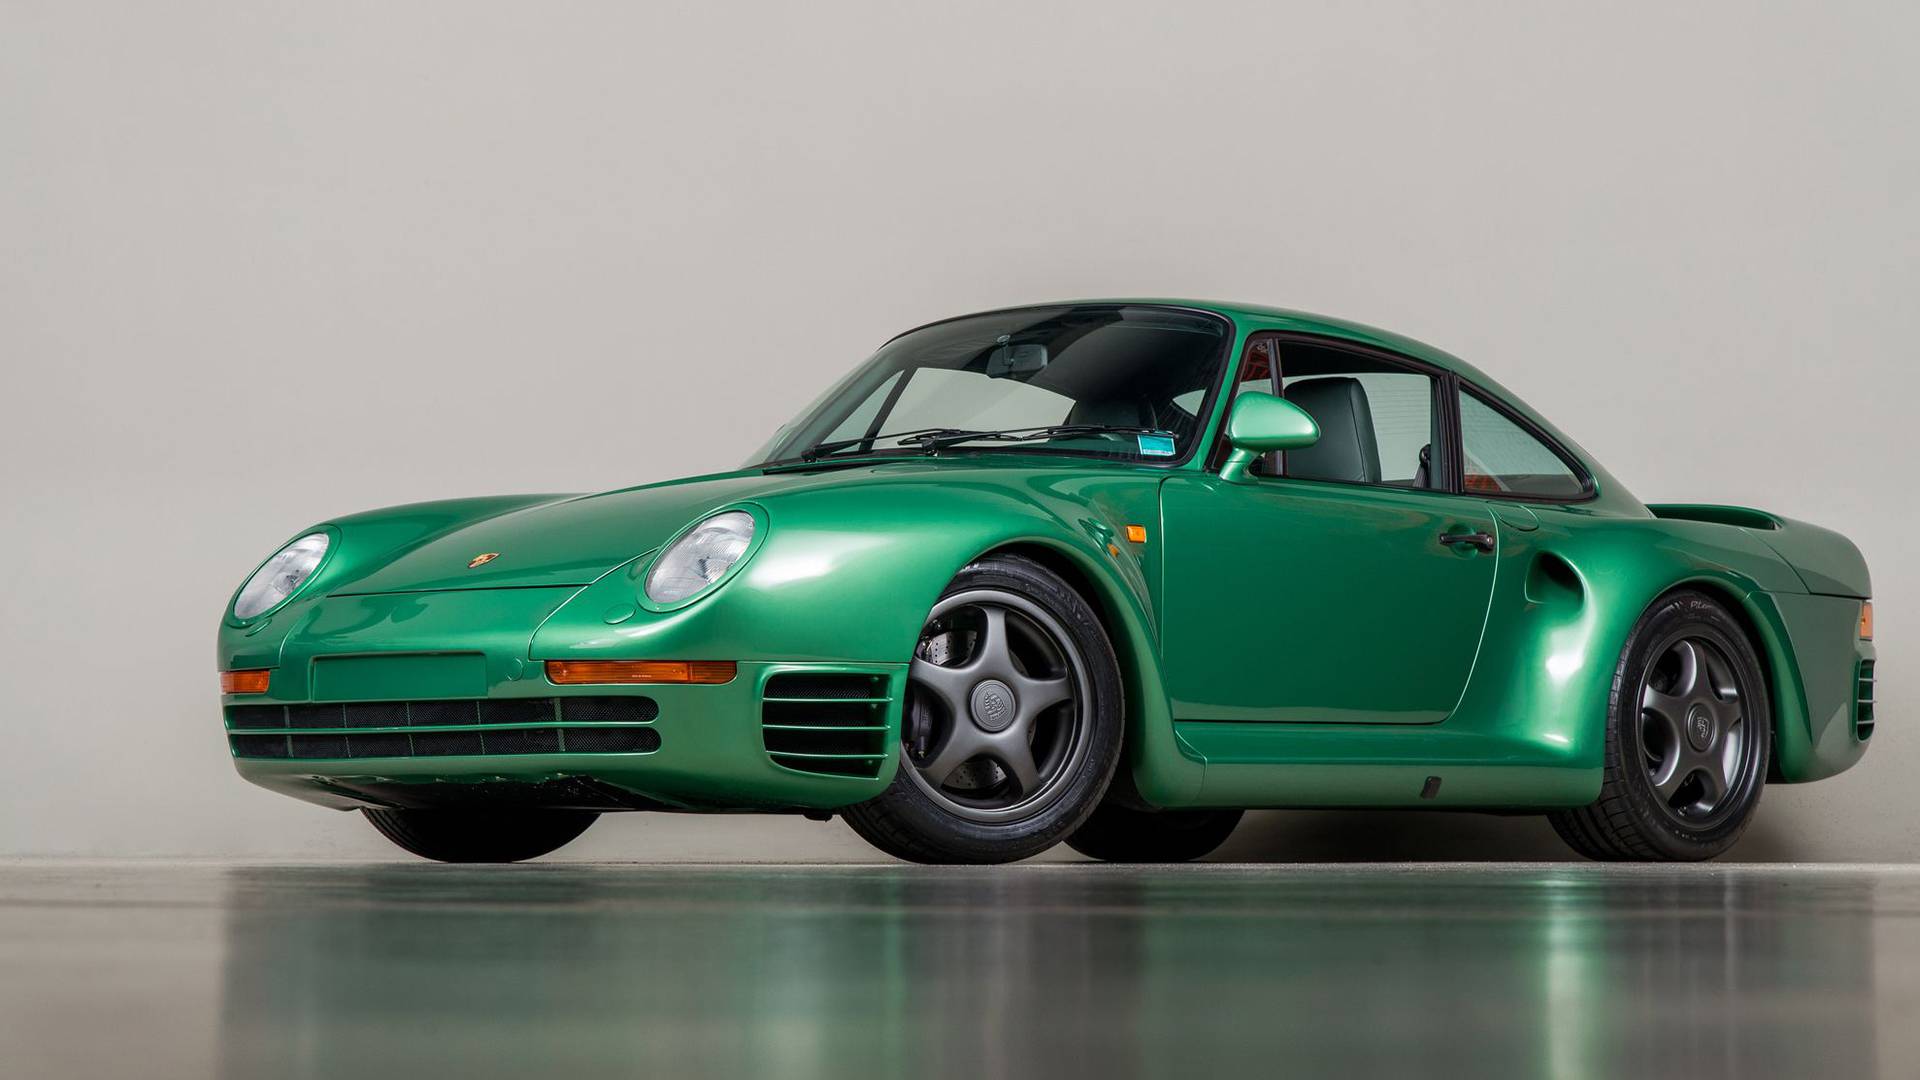 Company Offers $750K Upgrade For 30 Year Old Porsche 959